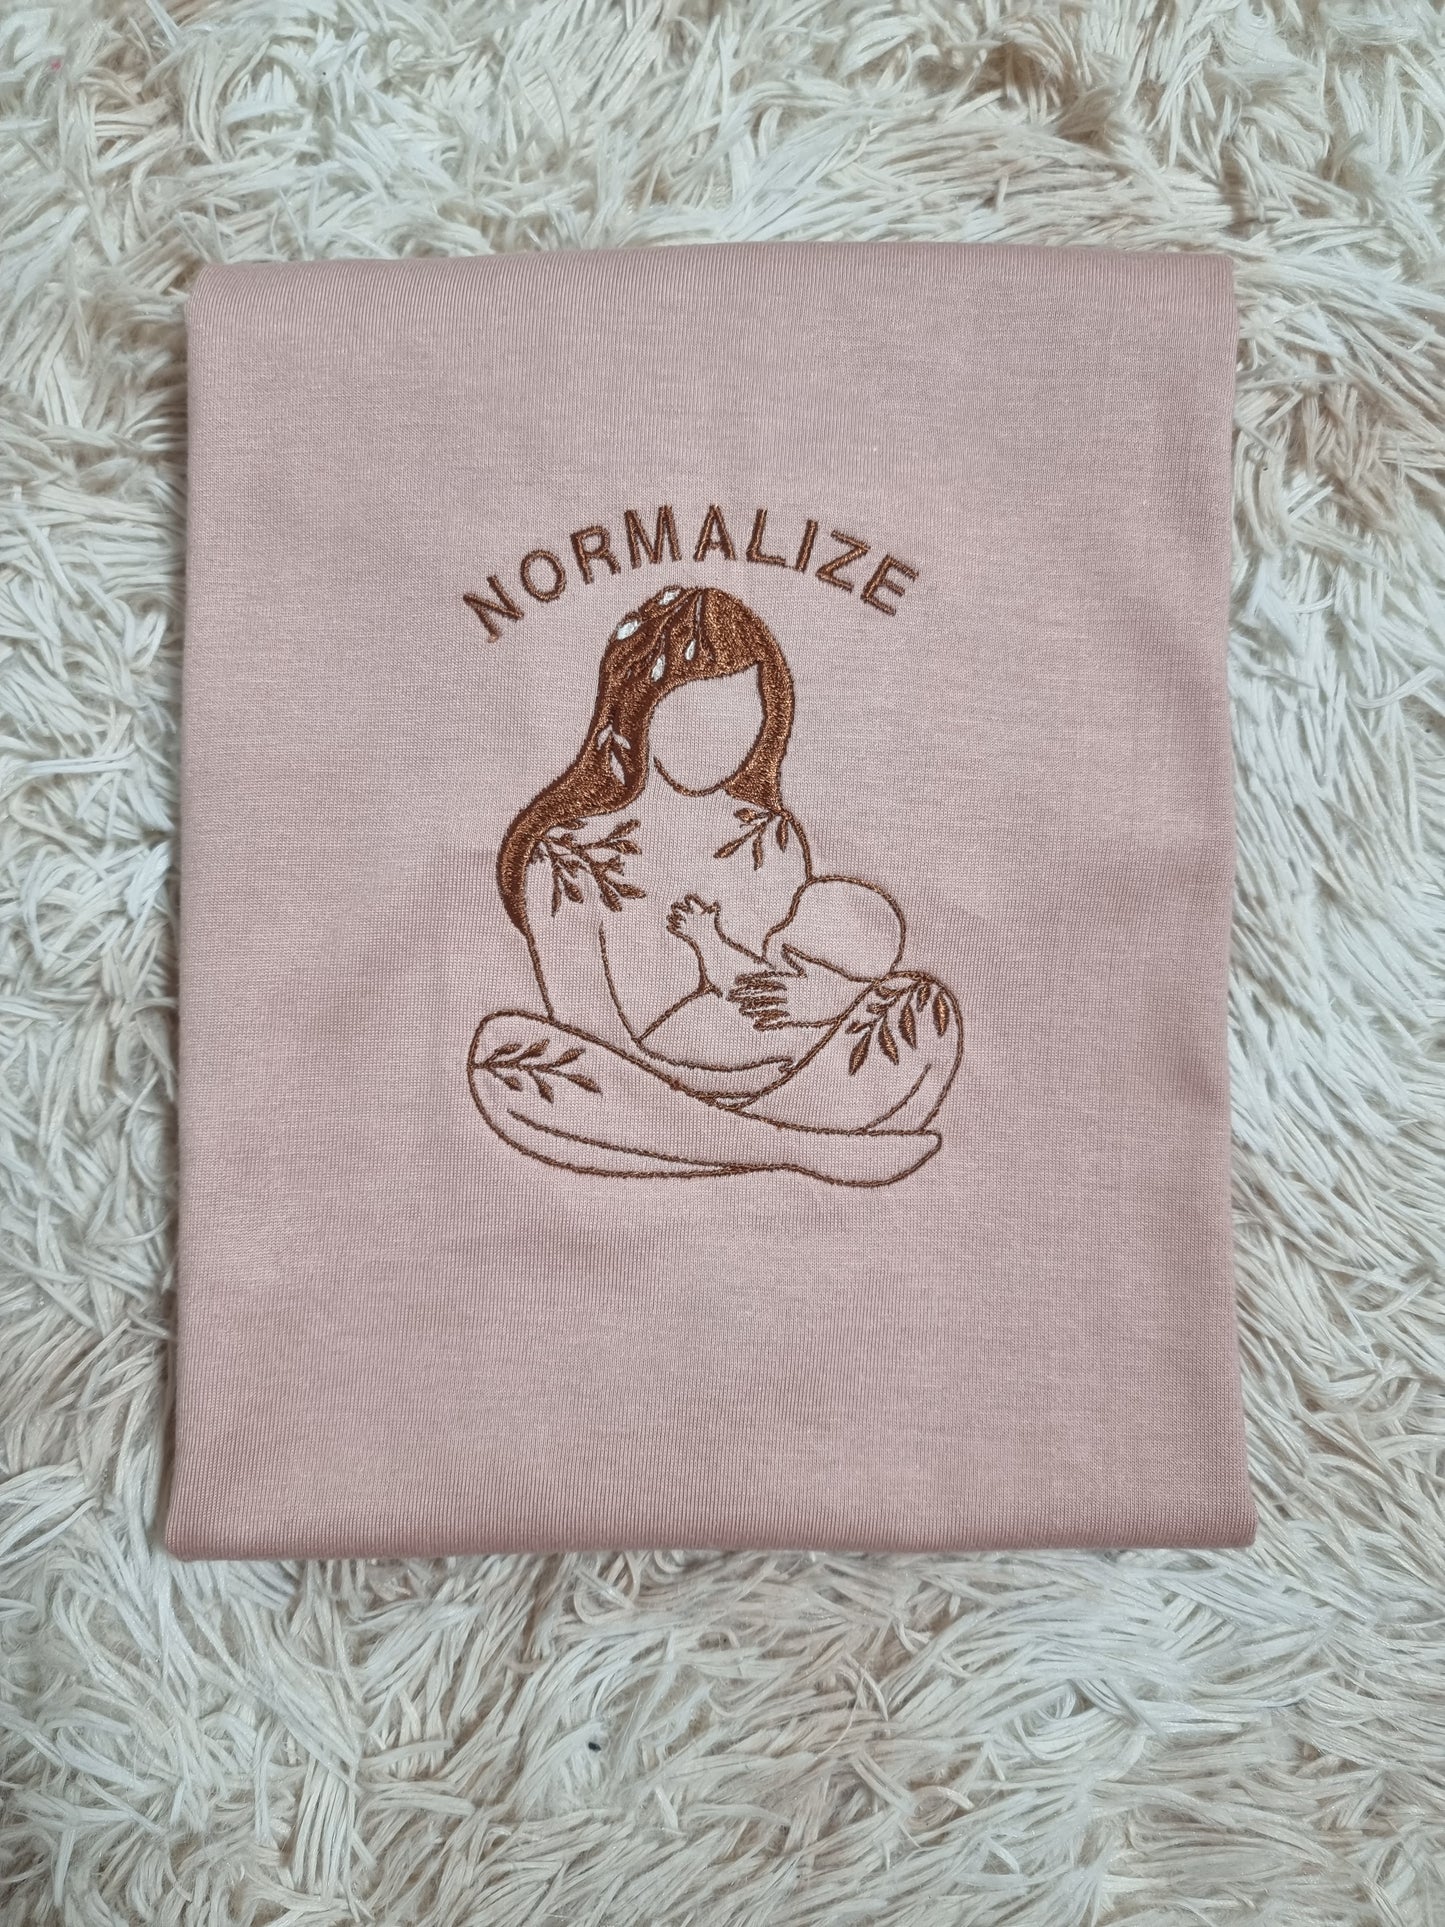 Embroidered T-Shirts - Normalize Breastfeeding Shirt Embroidery